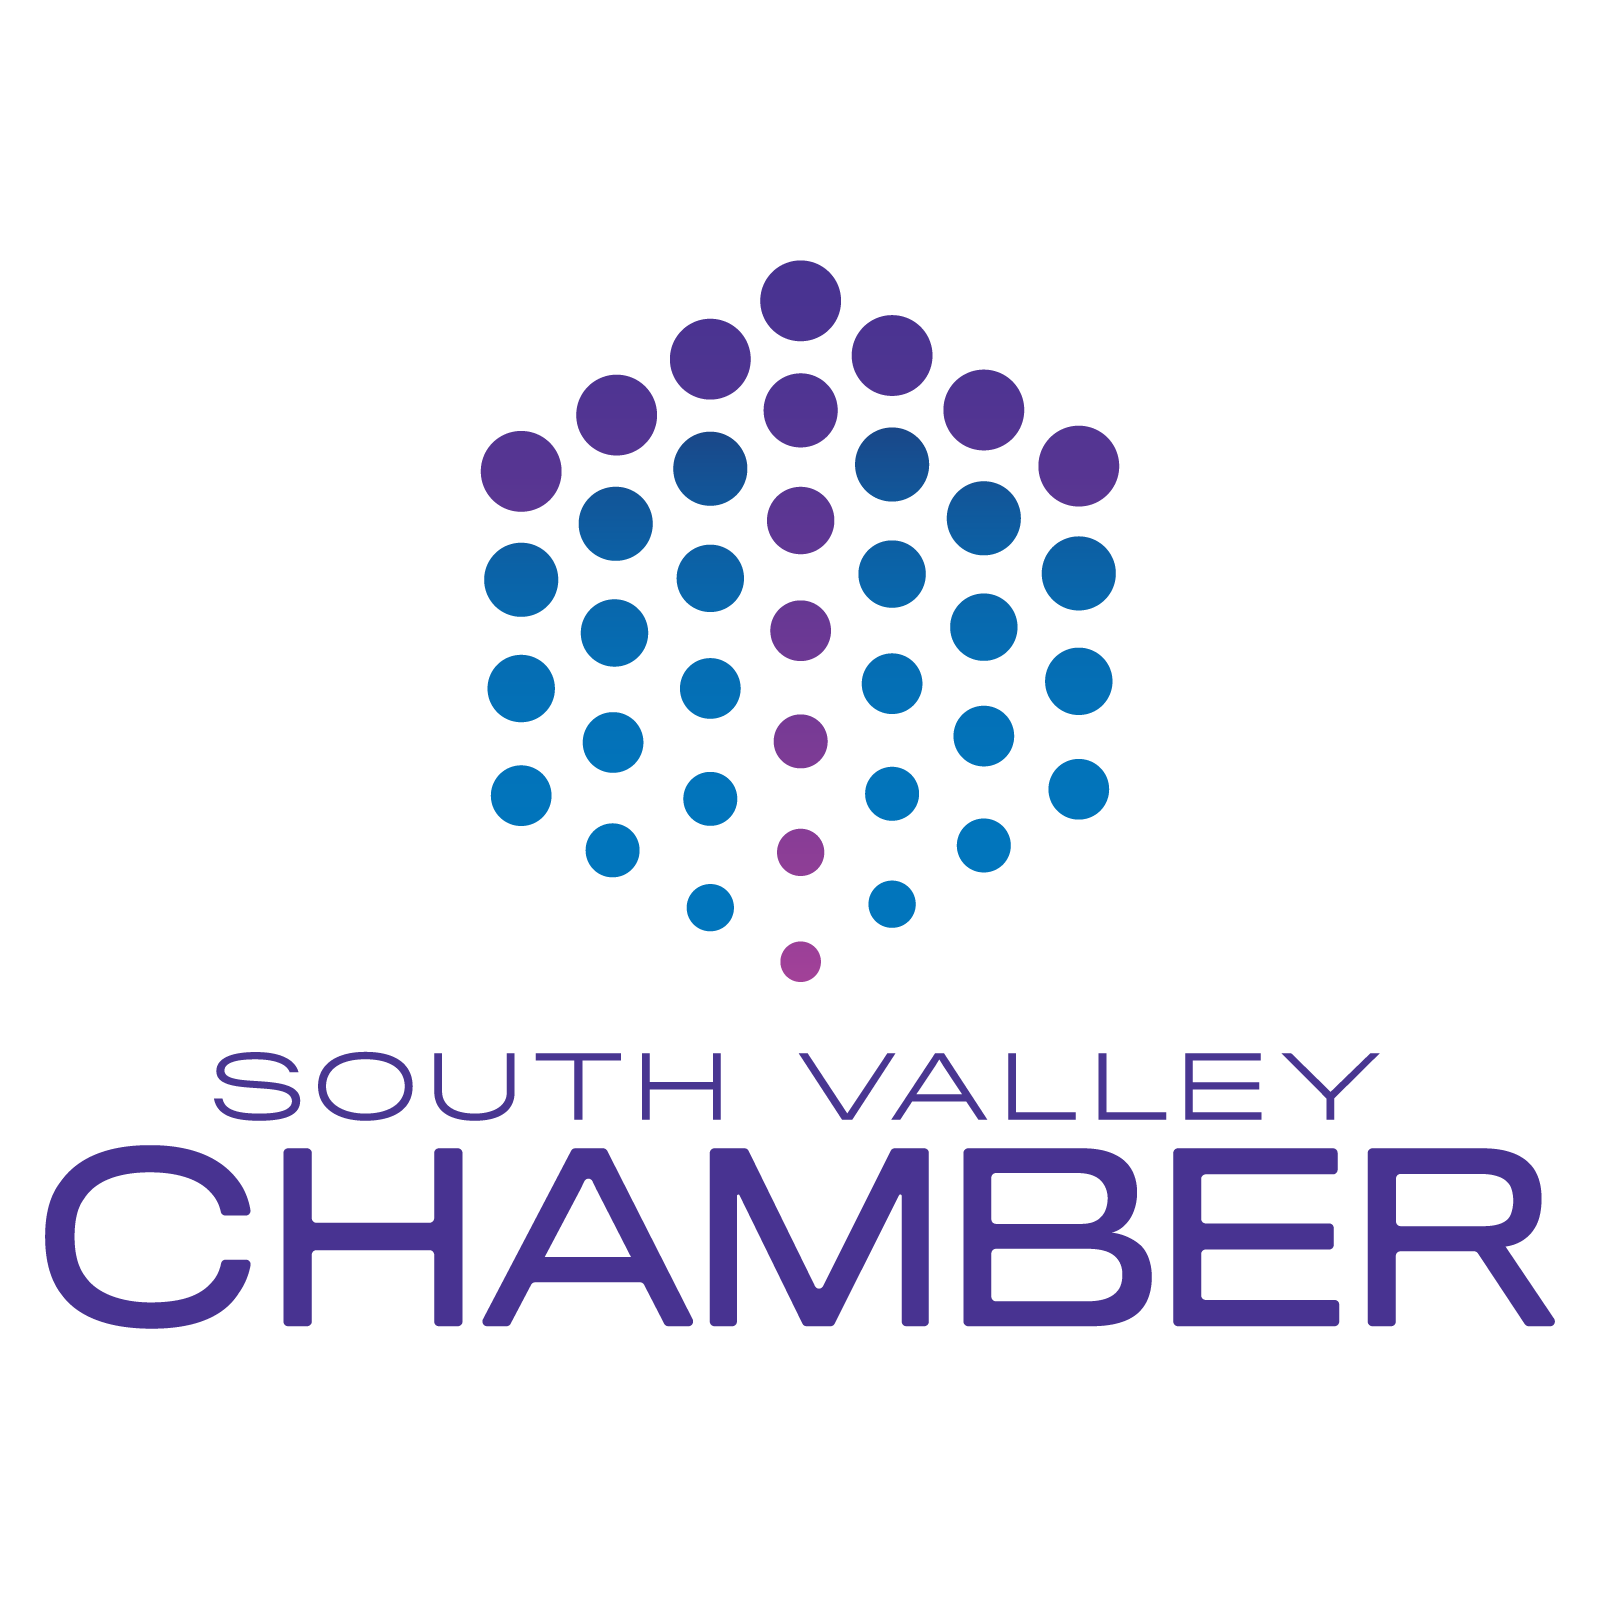 South Valley Chamber logo